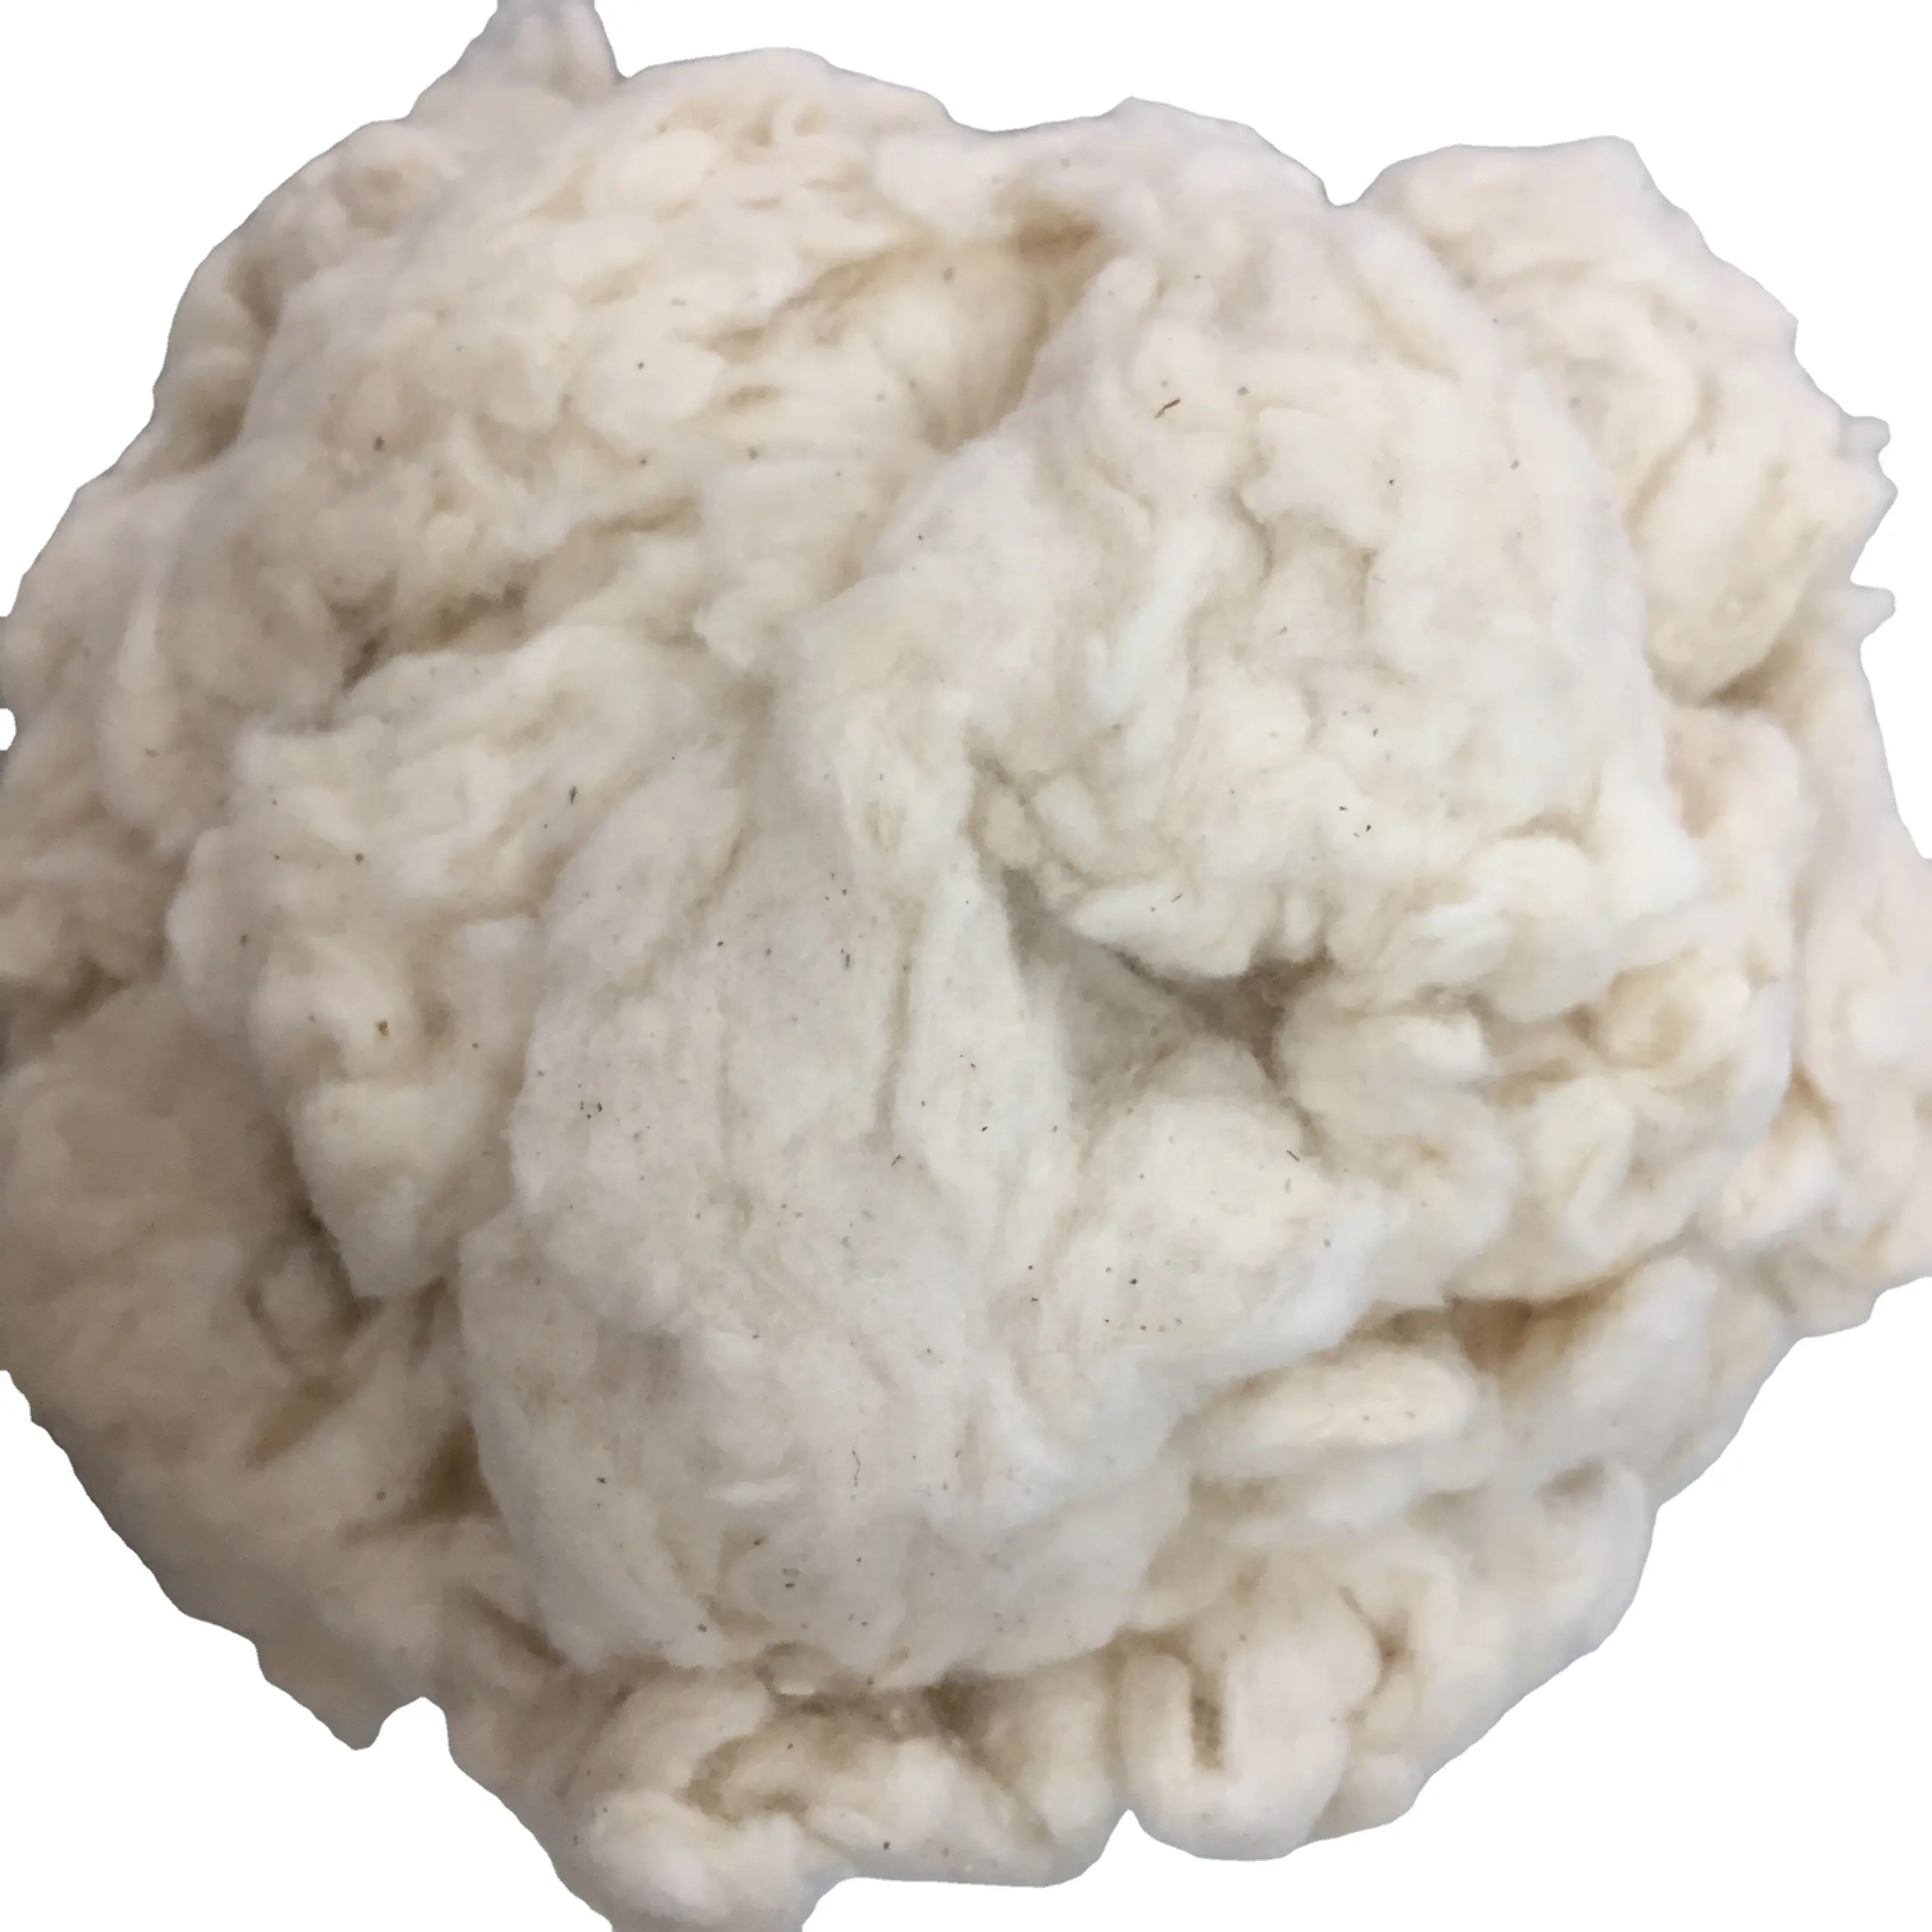 Bleached/unbleached Cotton Comber Noil Natural Eco-friendly Material for Spinning Yarn and Water Absorption - Ms. Mira